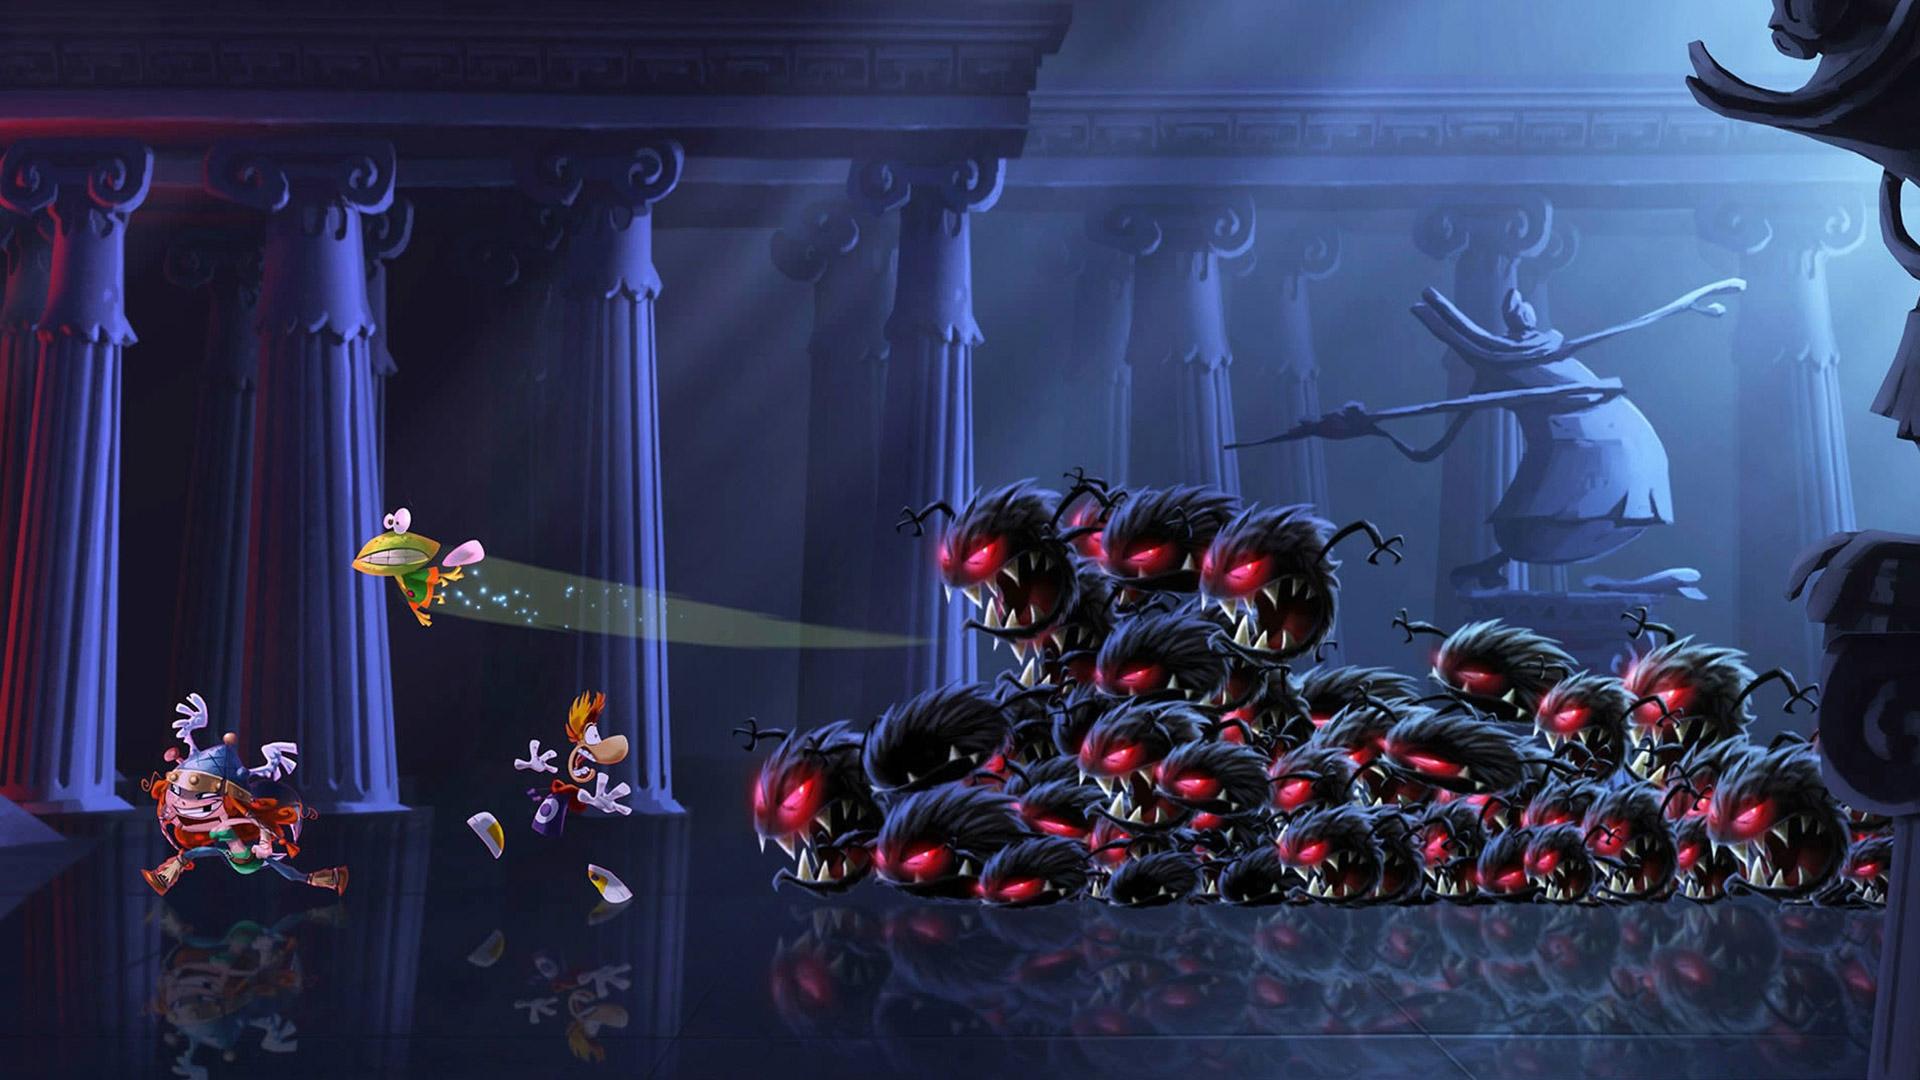 20+ Rayman Legends HD Wallpapers and Backgrounds